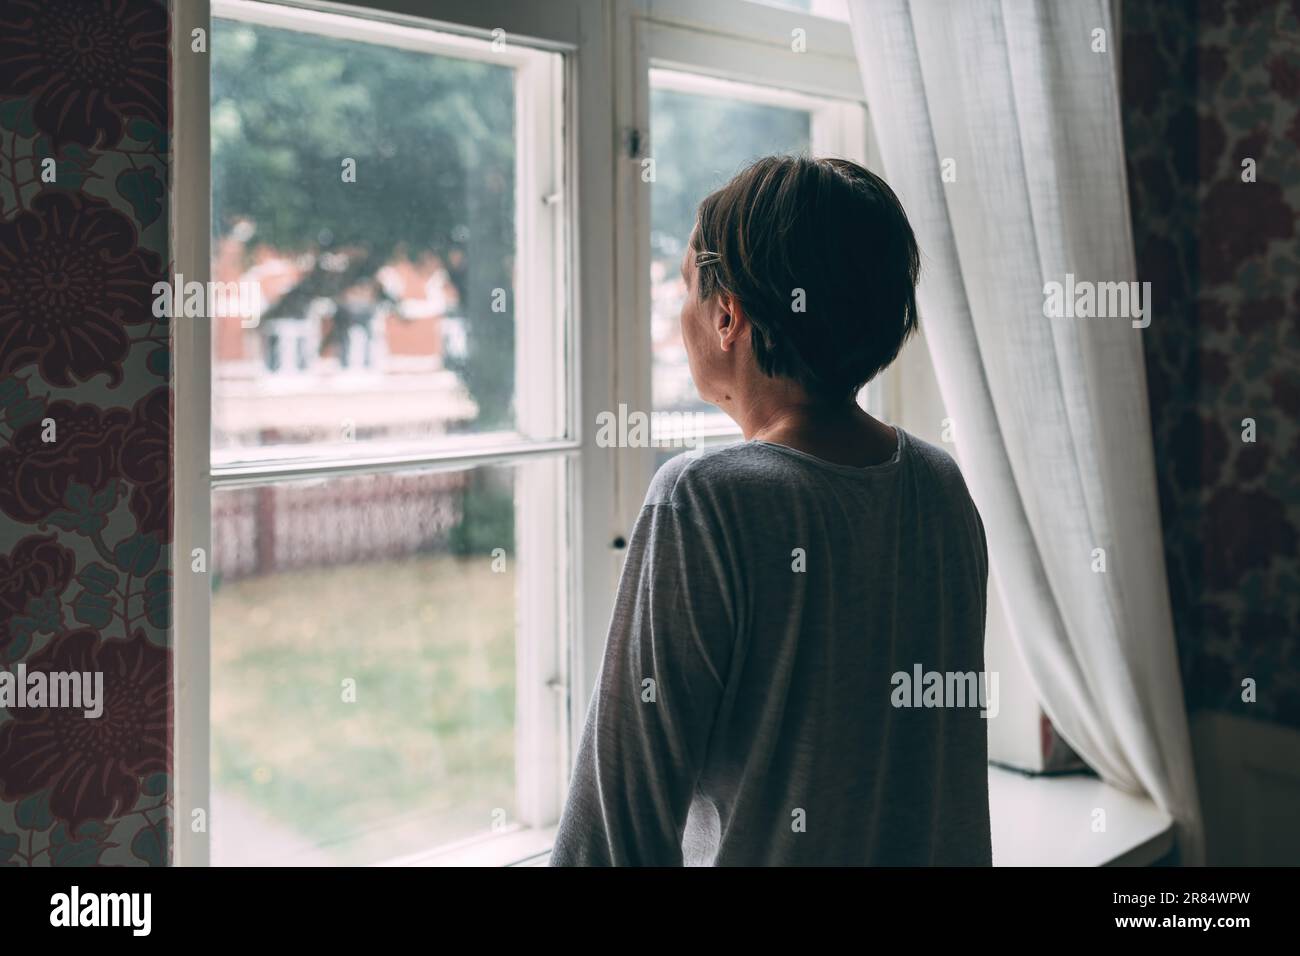 Introspective mid-adult female person looking out the window and contemplating, selective focus Stock Photo